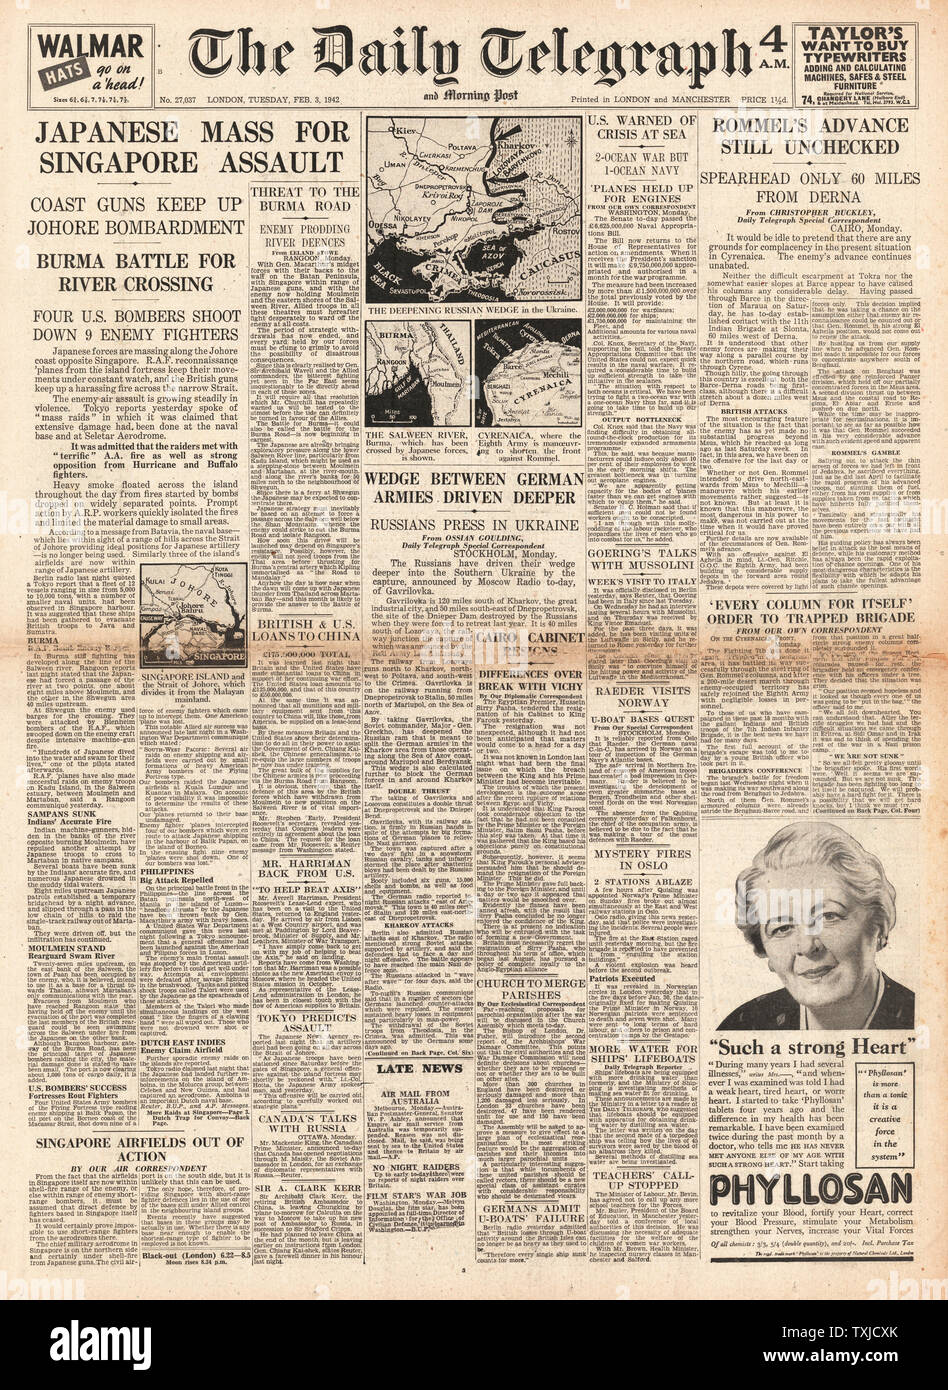 VINTAGE DAILY TELEGRAPH WW2 NEWSPAPER FEBRUARY 16TH 1942 FALL OF SINGAPORE 